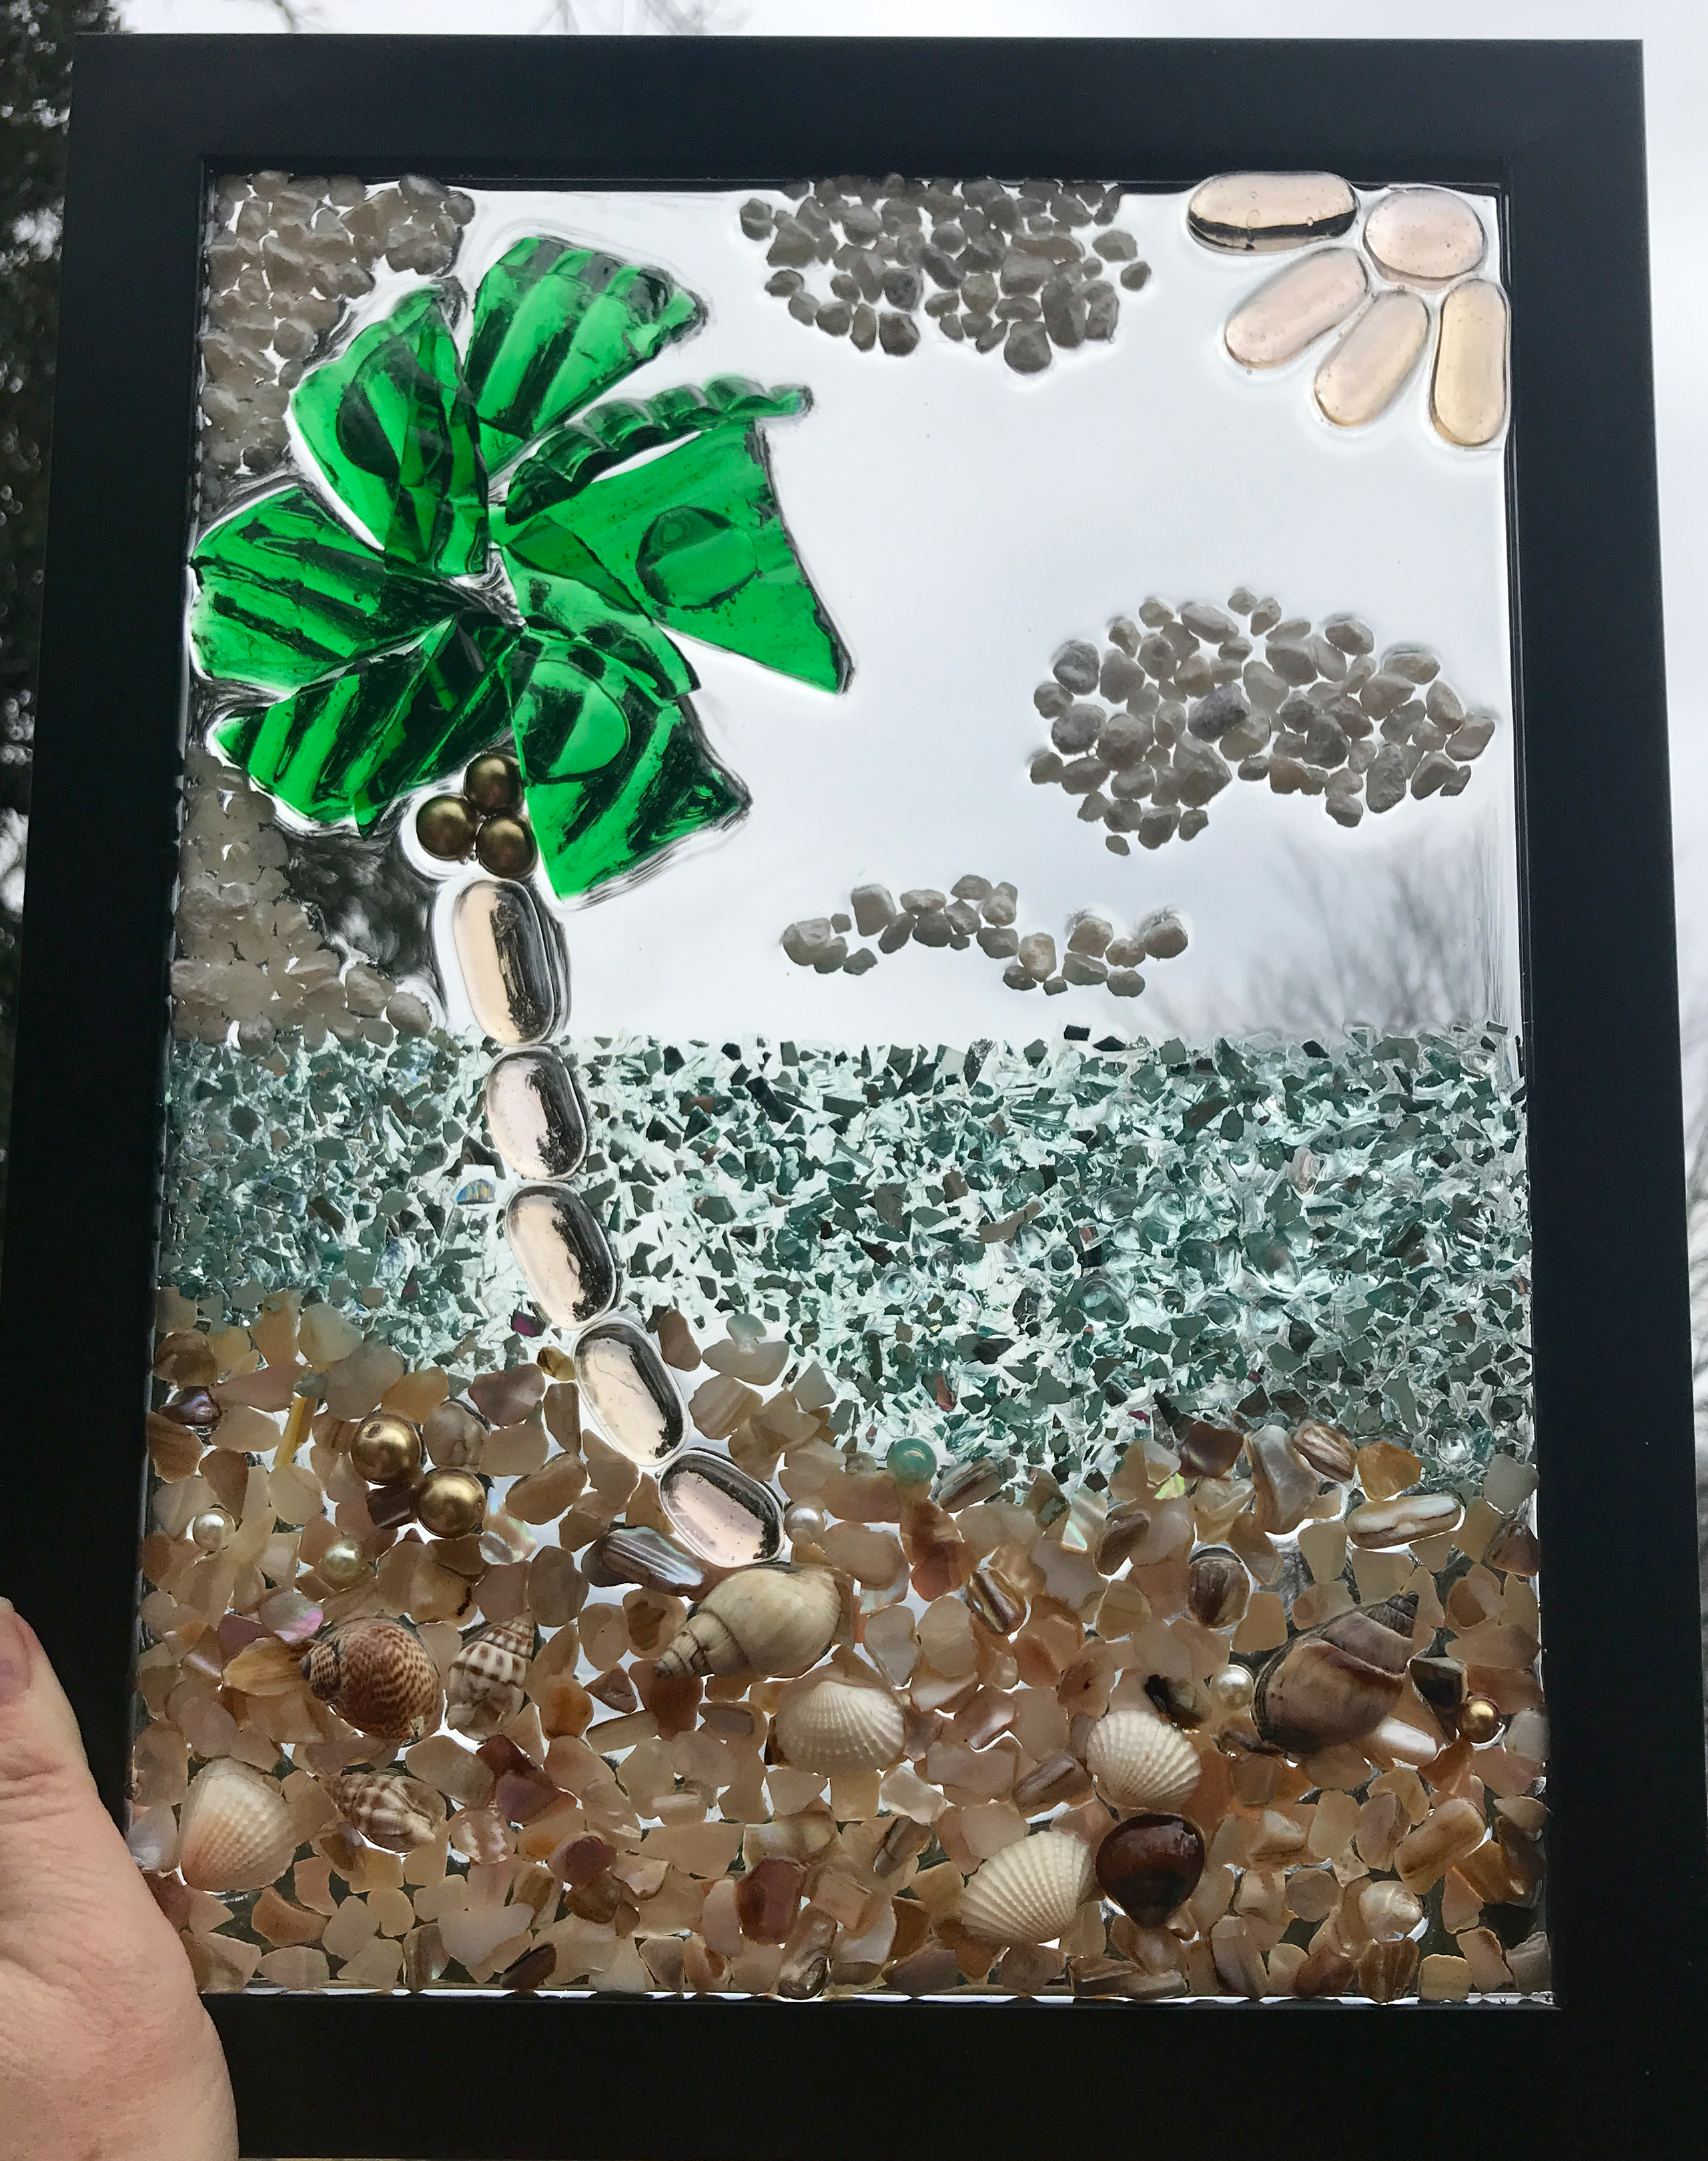 Private Party - Make a Framed Crushed Glass Resin Art Project with Laura  Scott